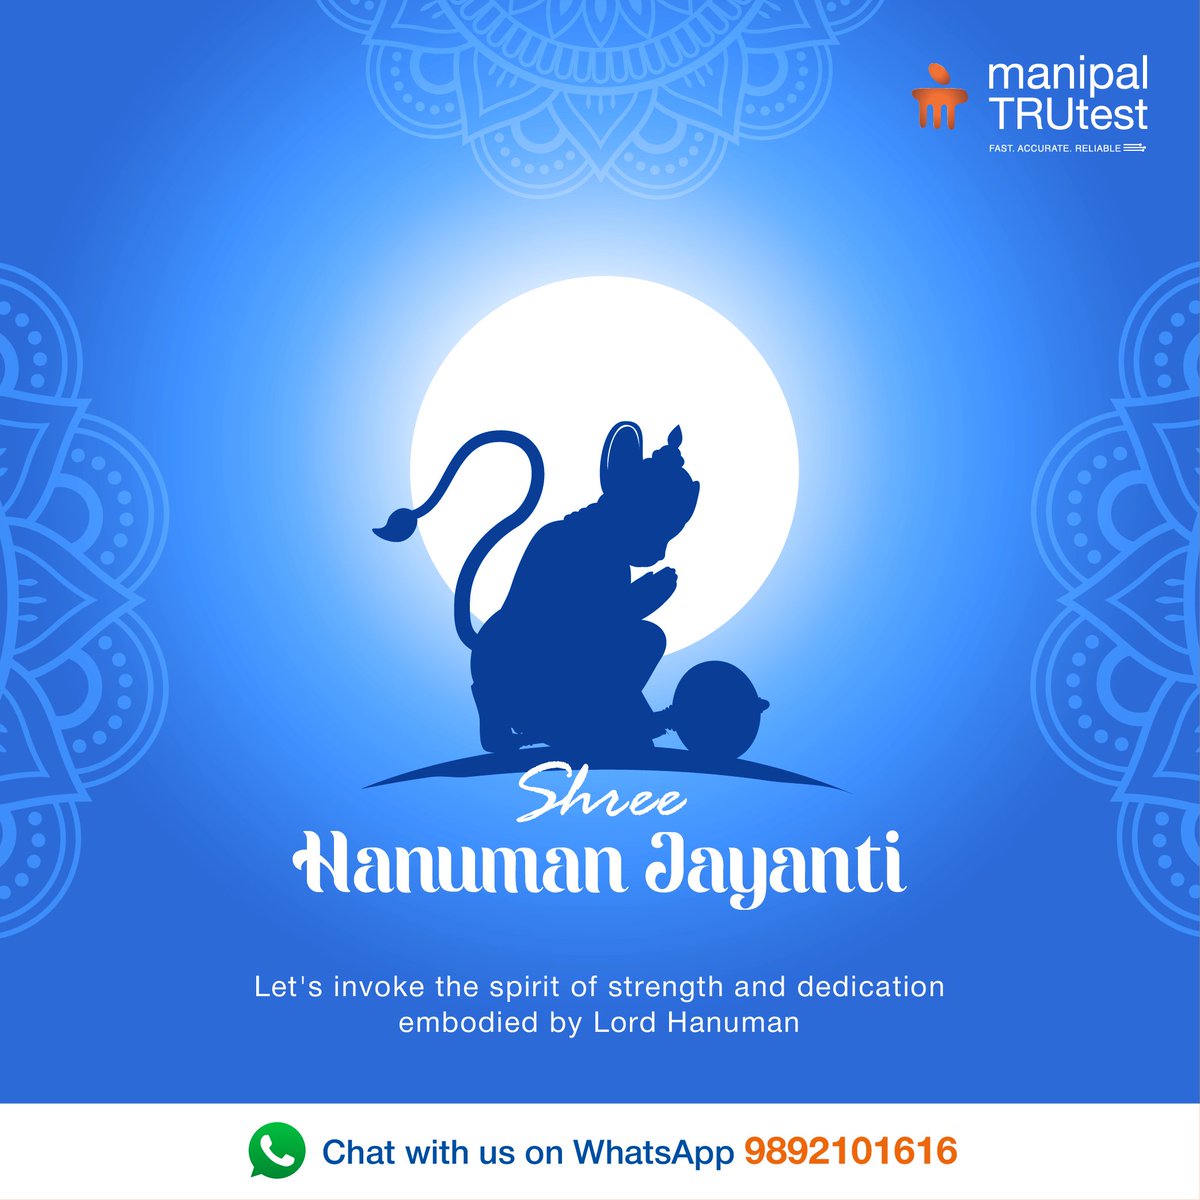 At Manipal TRUtest Diagnostic Services, we honor this auspicious day by reaffirming our commitment to providing comprehensive healthcare services to our community. May this Hanuman Jayanti bring you blessings of good health and prosperity!

#Hanumanjayanti #ManipalTrutest